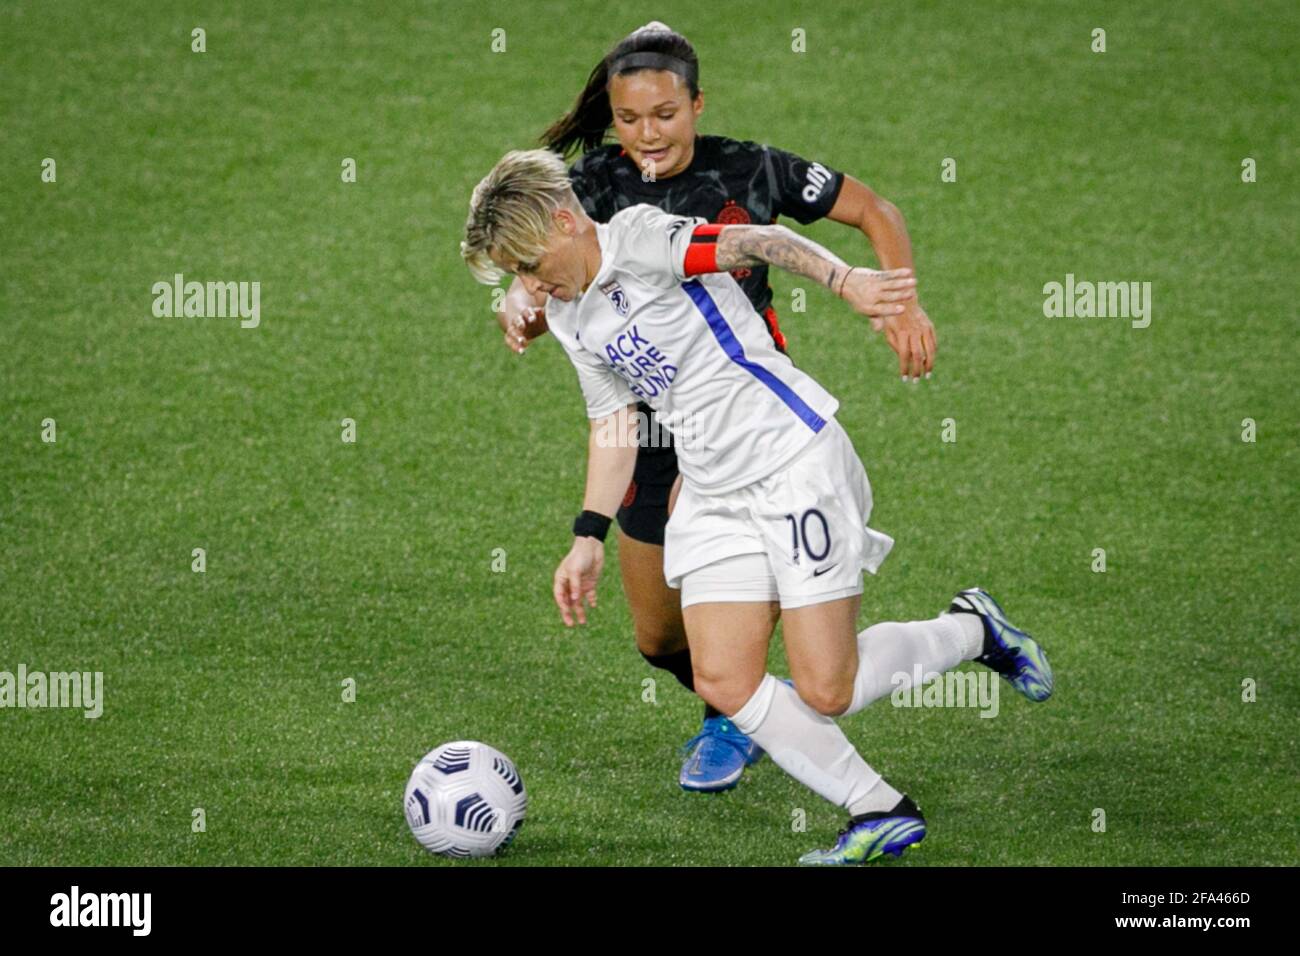 Portland, USA. 21st Apr, 2021. The Reign's Jessica Fishlock (10) steals the ball. The Portland Thorns FC beat Tacoma's OL Reign 2-0 at Providence Park in Portland, Oregon on April 21, 2021, which sends the Thorns to the Challenge Cup finals at home on May 8. (Photo by John Rudoff/Sipa USA) Credit: Sipa USA/Alamy Live News Stock Photo